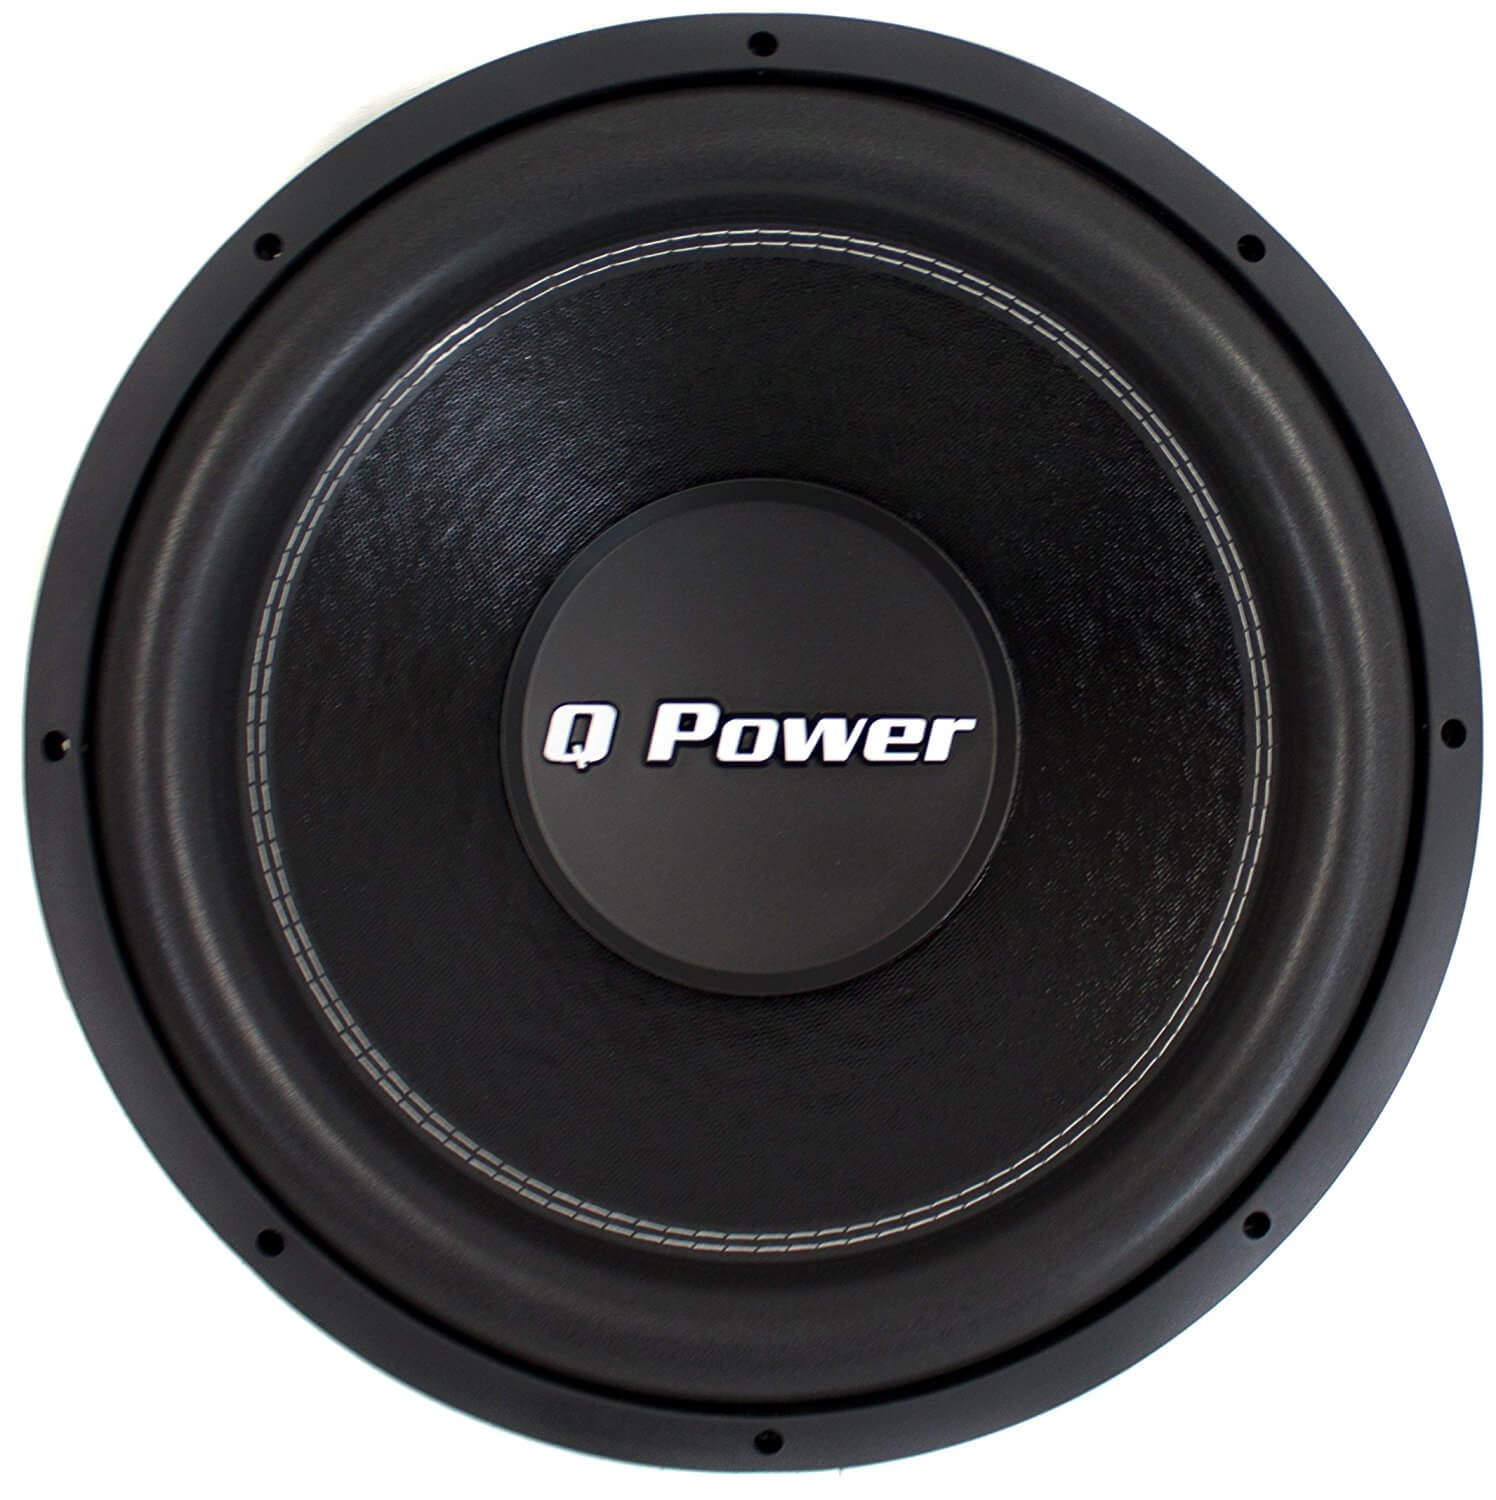 Q-POWER QPF15 15-Inch Deluxe Series Subwoofer